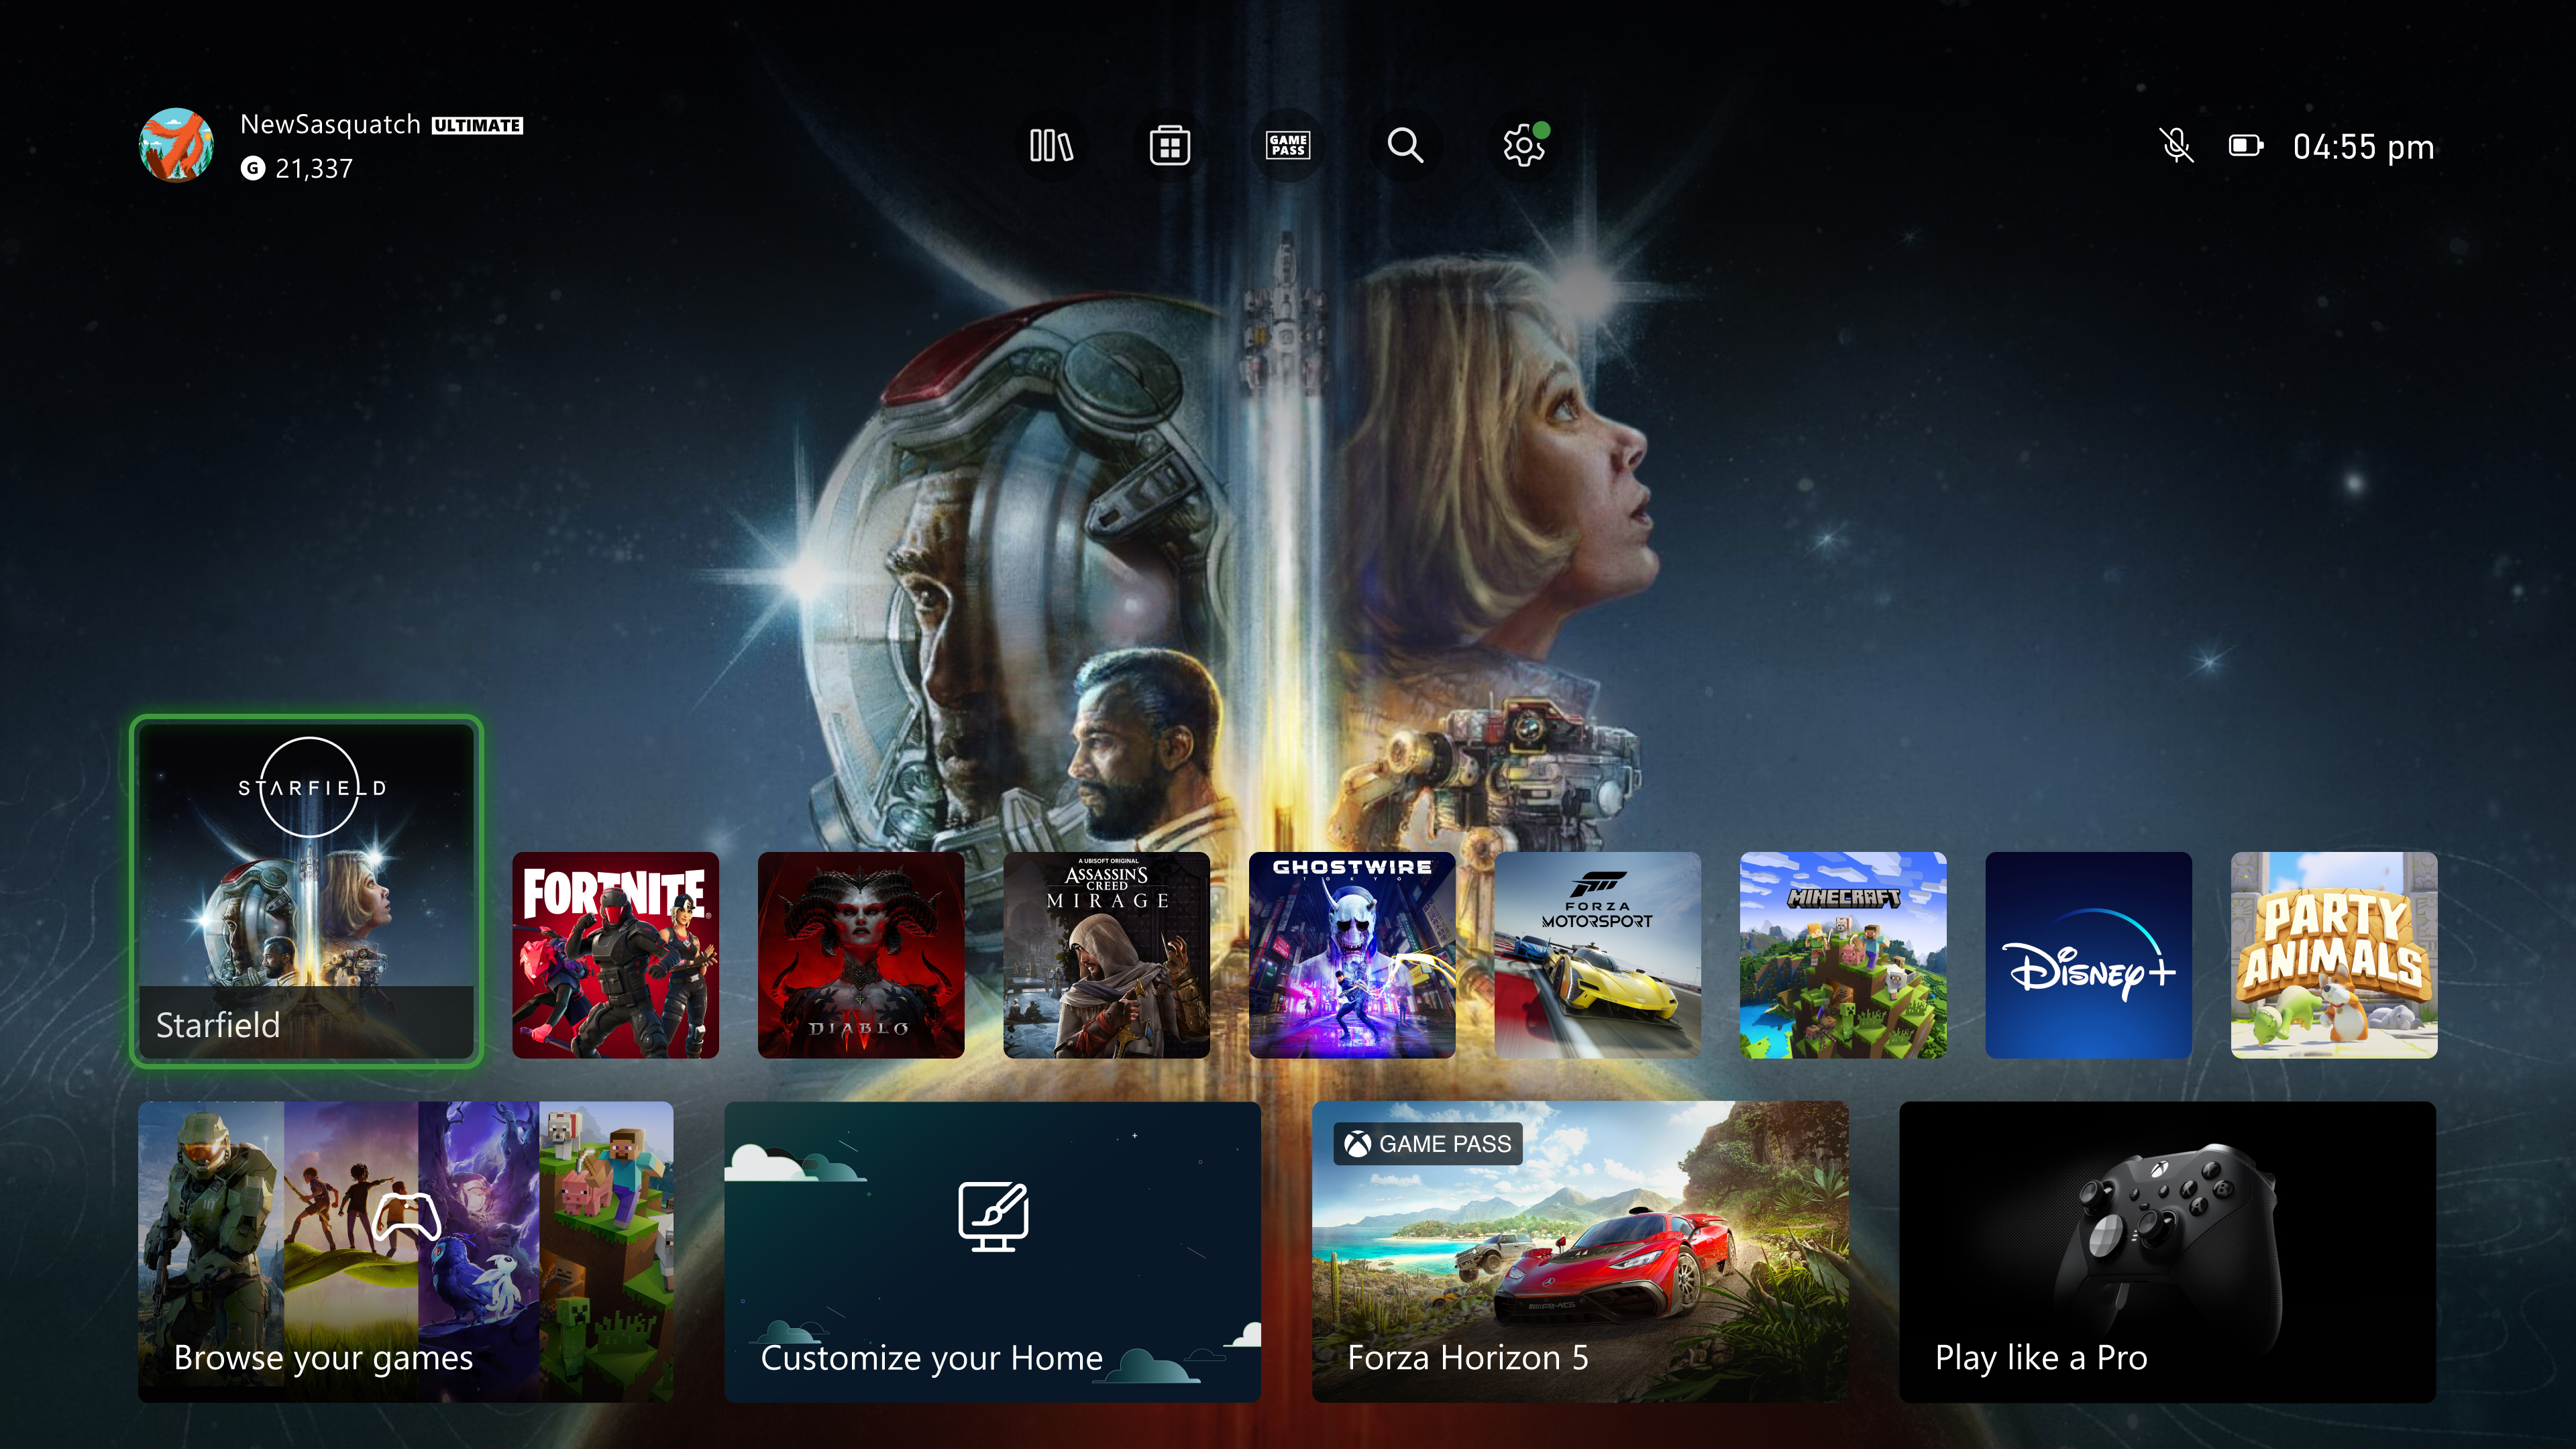 Microsoft wants Xbox to be the entertainment hub for all your